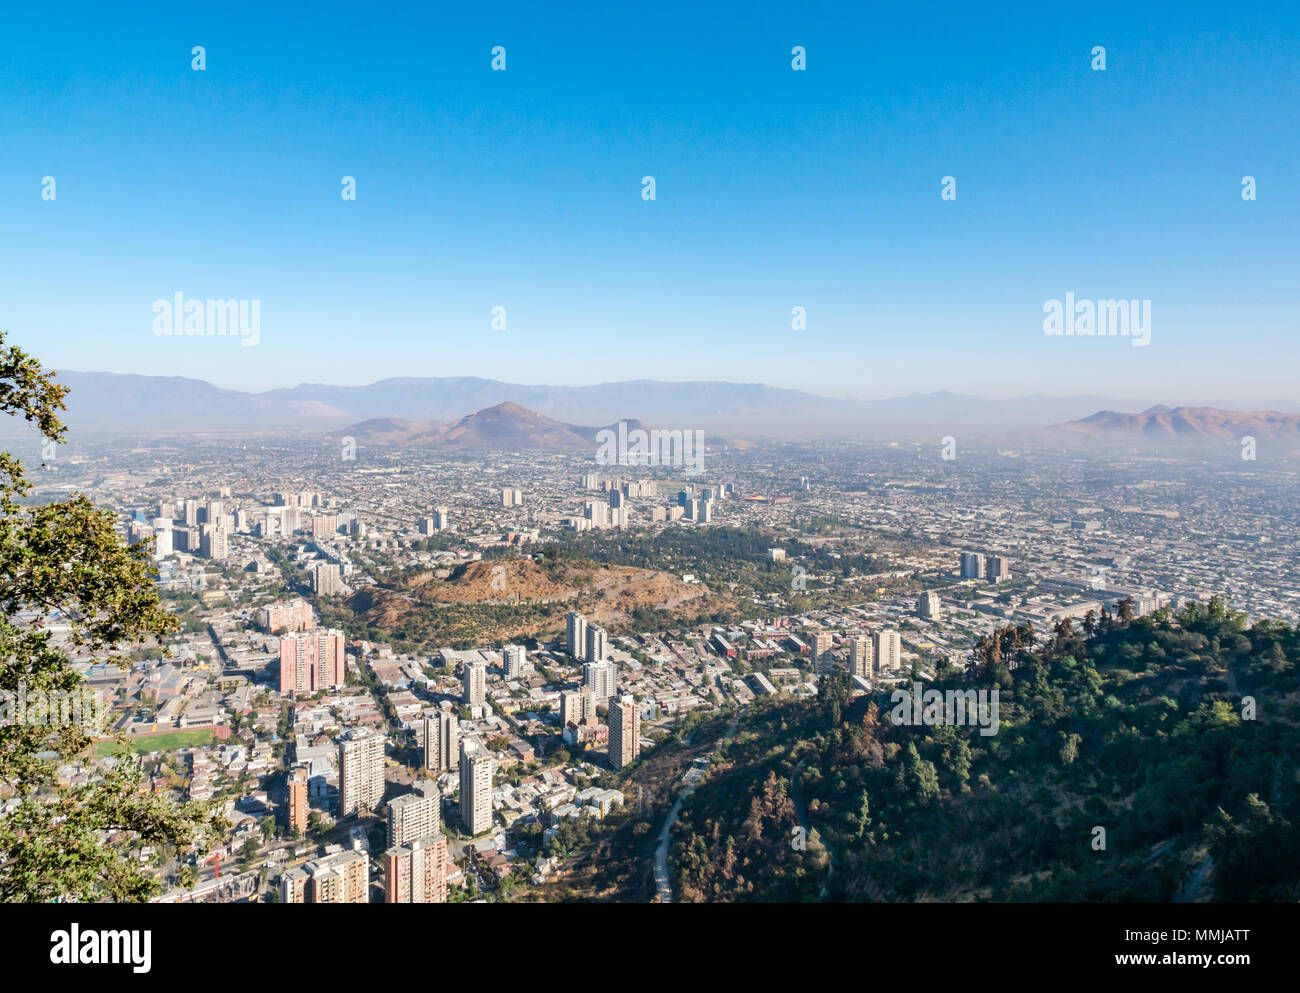 Cityscape view from San Cristobal hill, Santiago, Chile, with smog visible looking towards Andes foothills Stock Photo